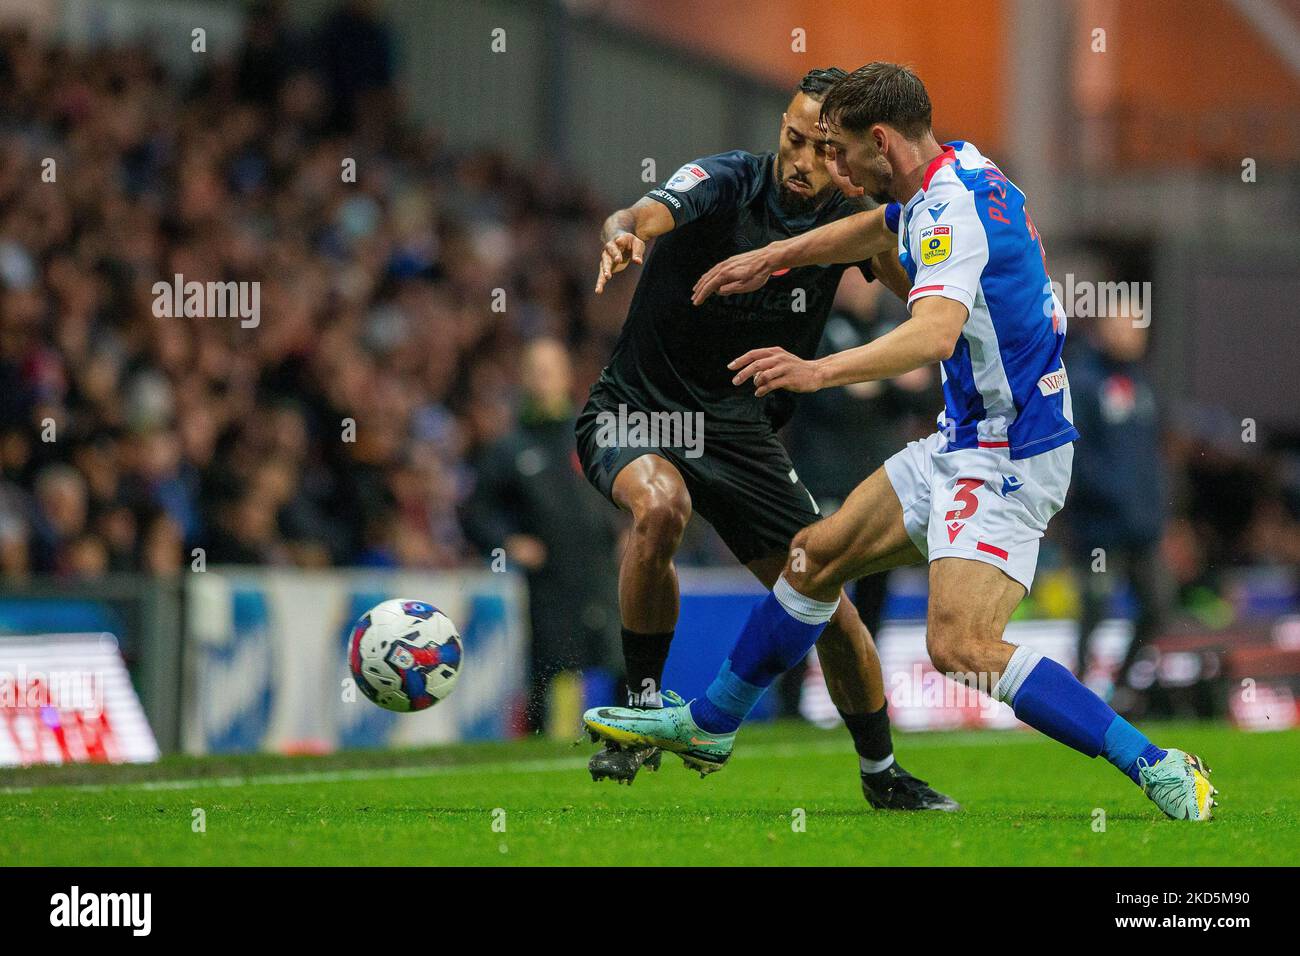 Harry Pickering #3 of Blackburn Rovers challenges Sorba Thomas #7 of Huddersfield Town during the Sky Bet Championship match Blackburn Rovers vs Huddersfield Town at Ewood Park, Blackburn, United Kingdom, 5th November 2022  (Photo by Phil Bryan/News Images) Stock Photo